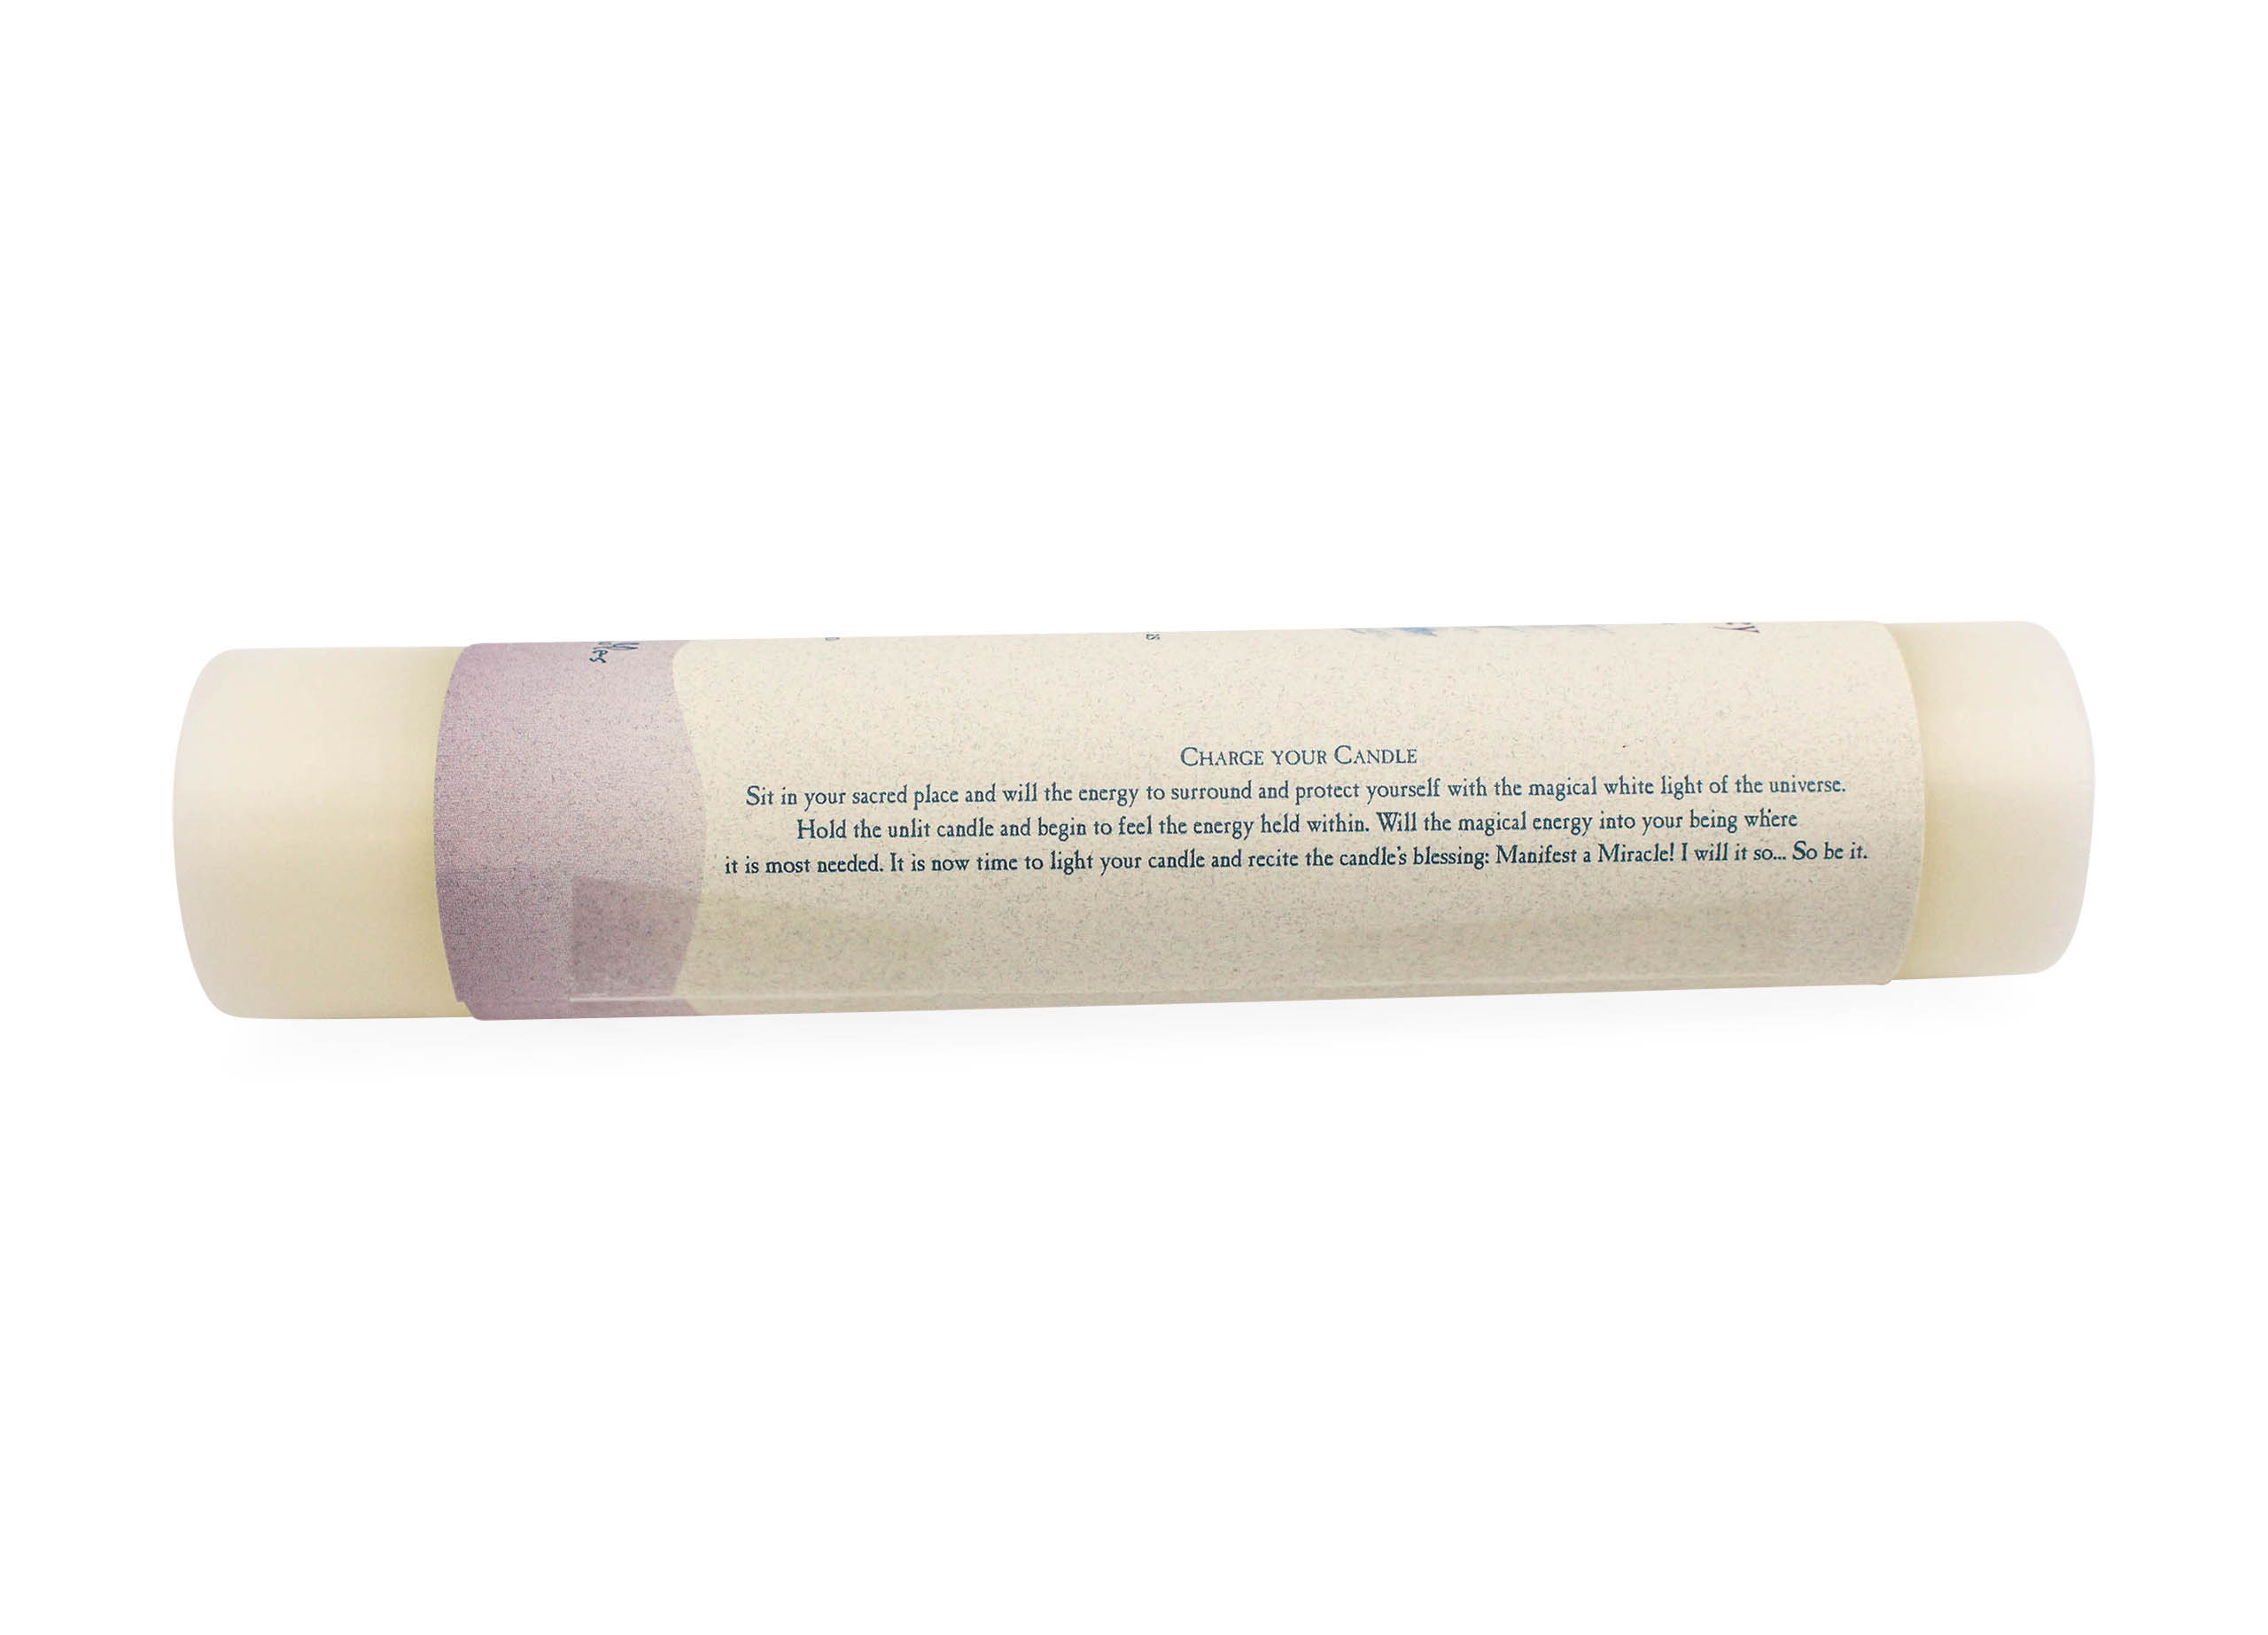 Herbal Pillar Astral Journey Candle - Crystal Dreams